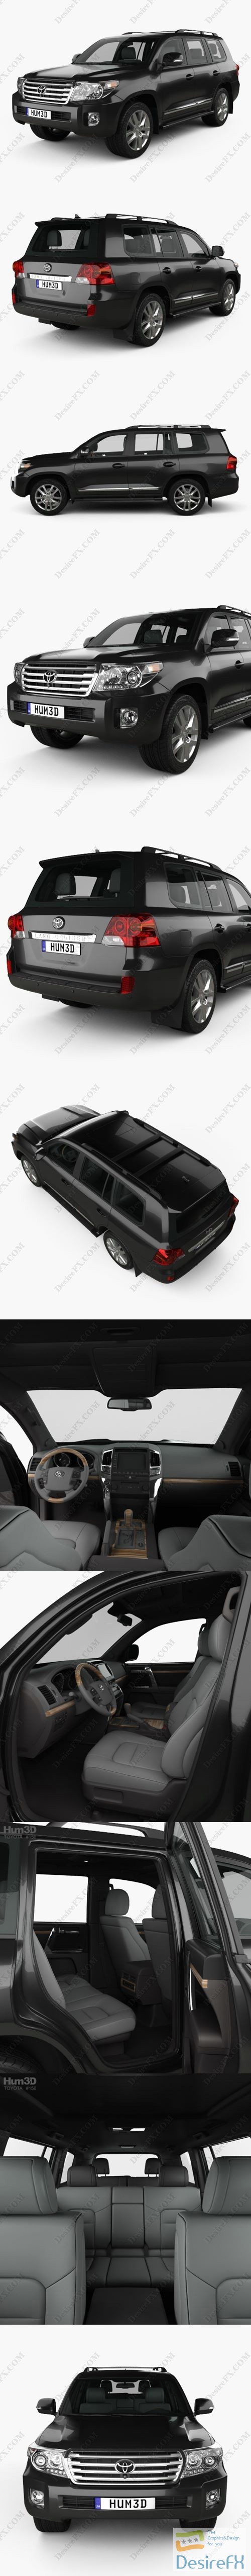 Toyota Land Cruiser J200 with HQ interior 2013 3D Model